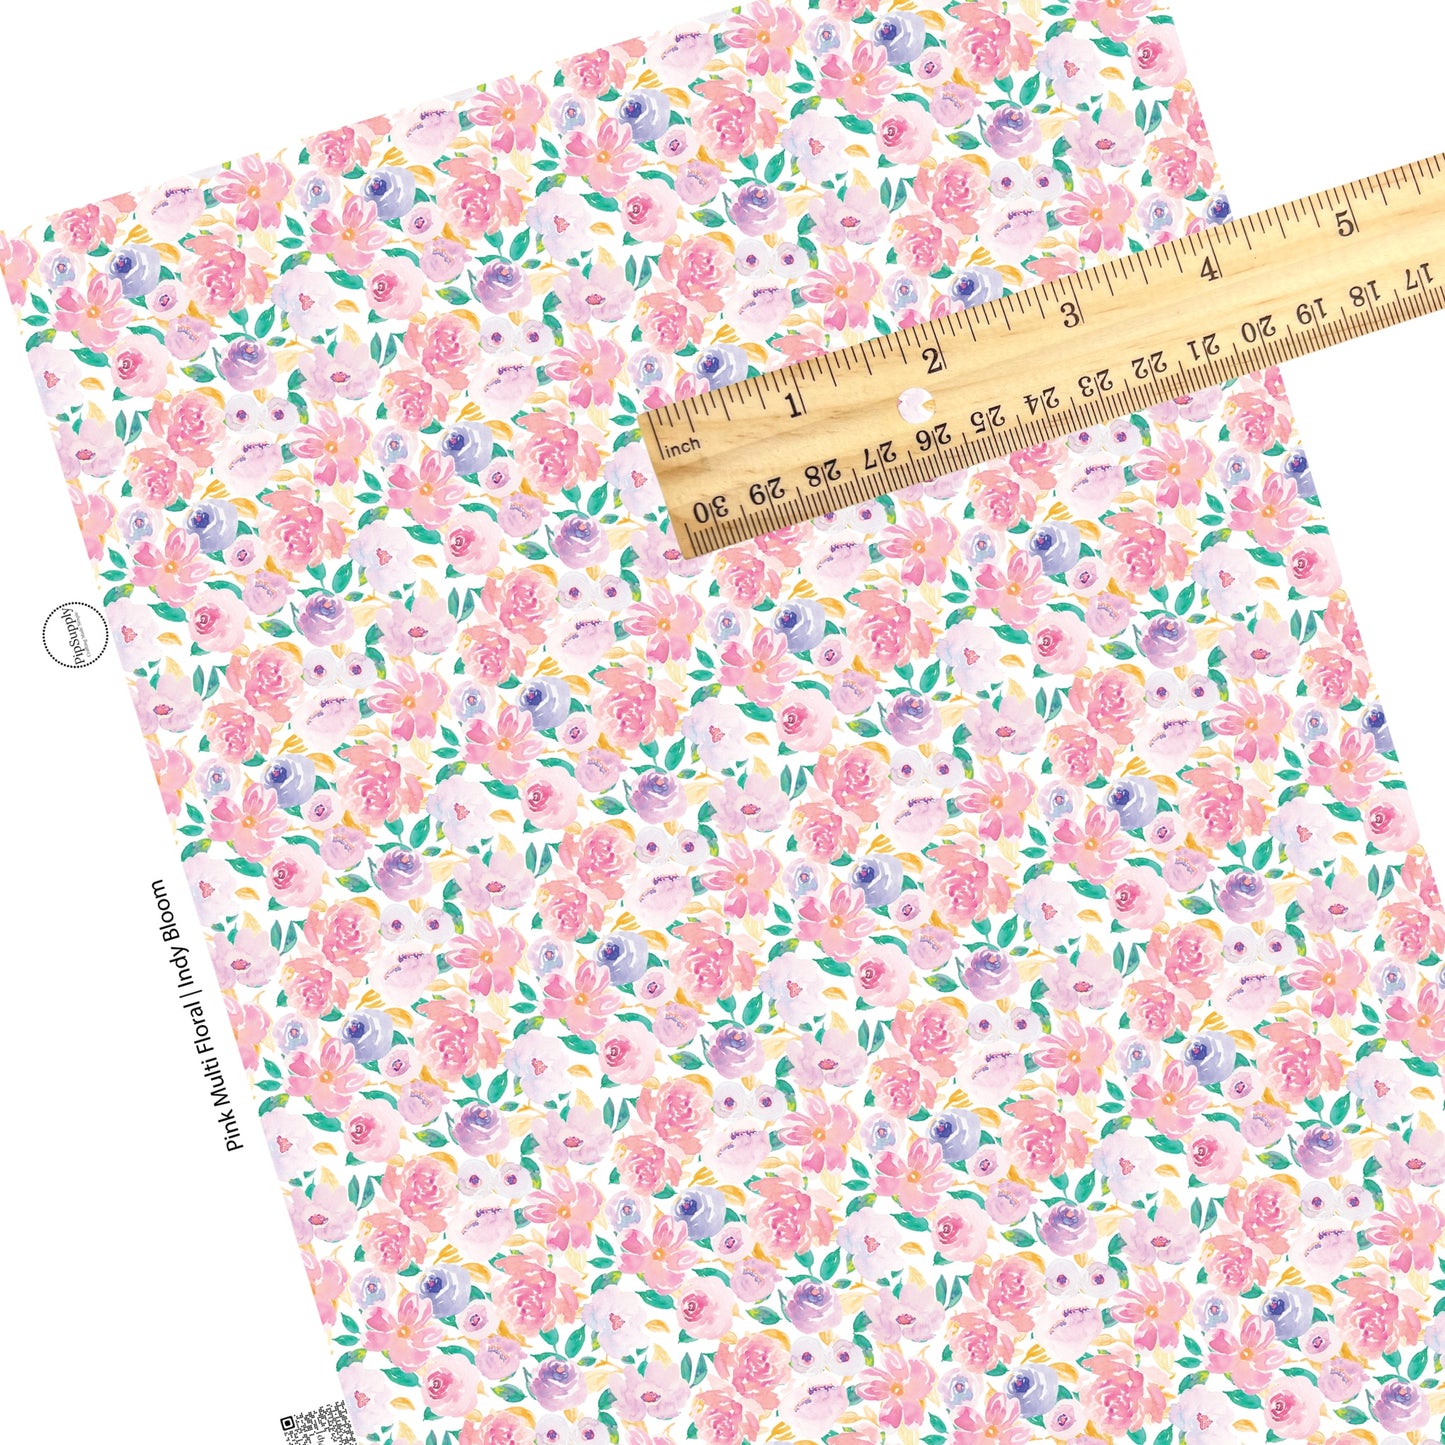 These pastel watercolor flowers on white faux leather sheets contain the following design elements: flowers in the colors of peach, pink, light blush, orange, green, purple, and lavender.